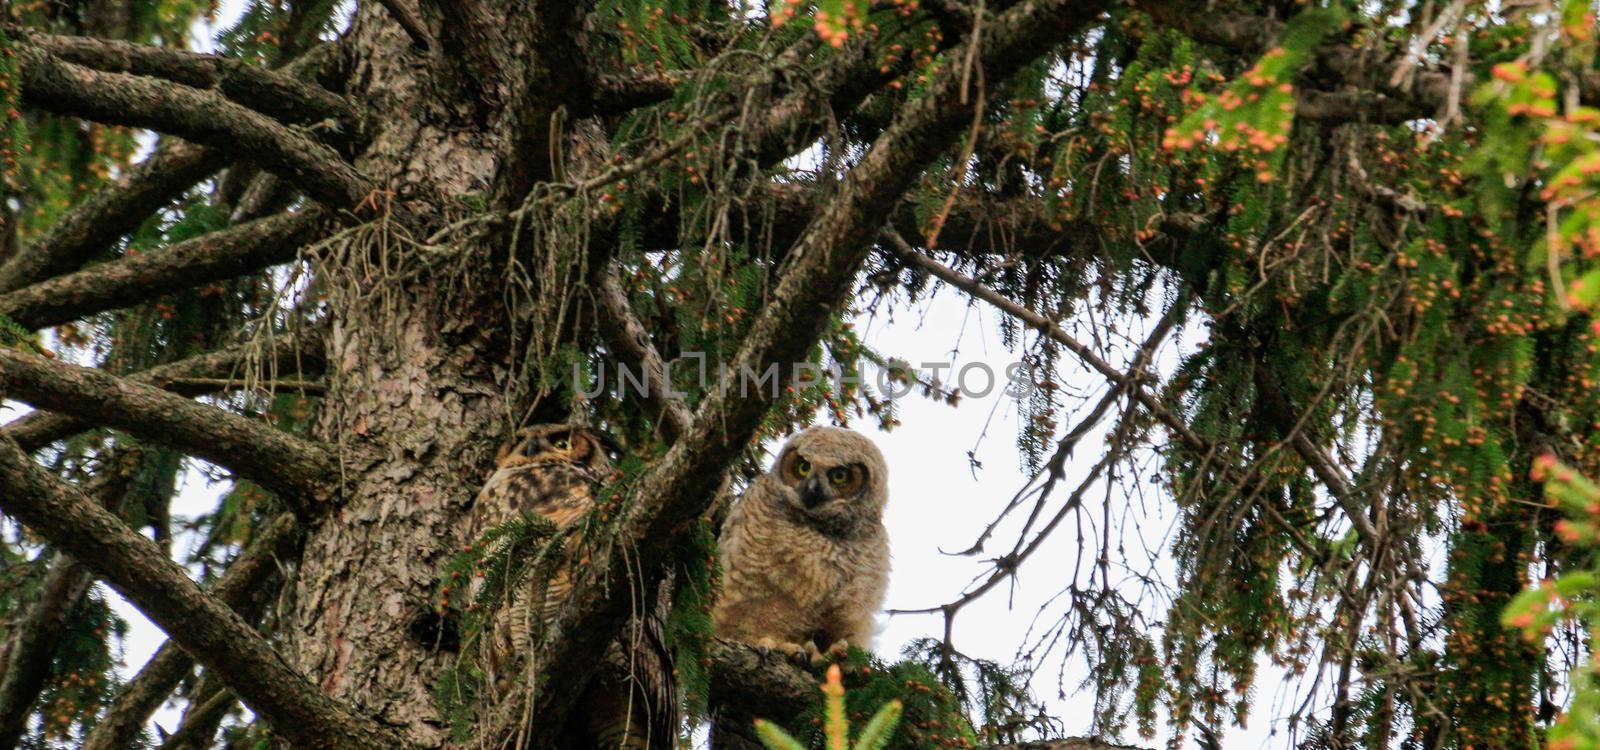 A great horned owl and her owlet sitting in a tree at dusk preparing to hunt by mynewturtle1